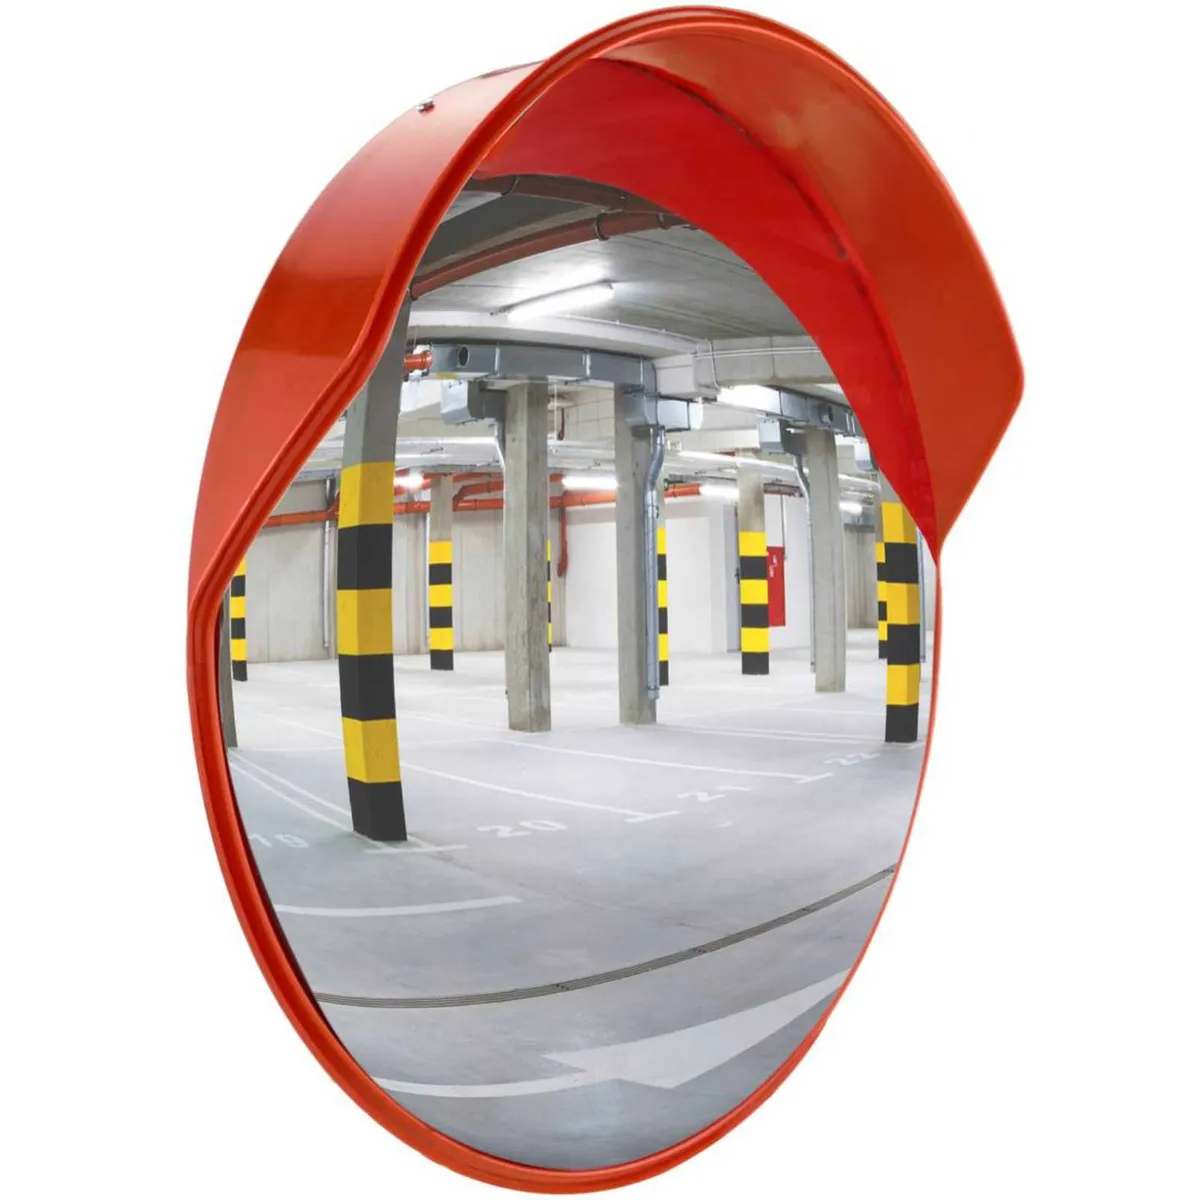 600mm Driveway Convex Safety Blind spot Mirror - Image 1